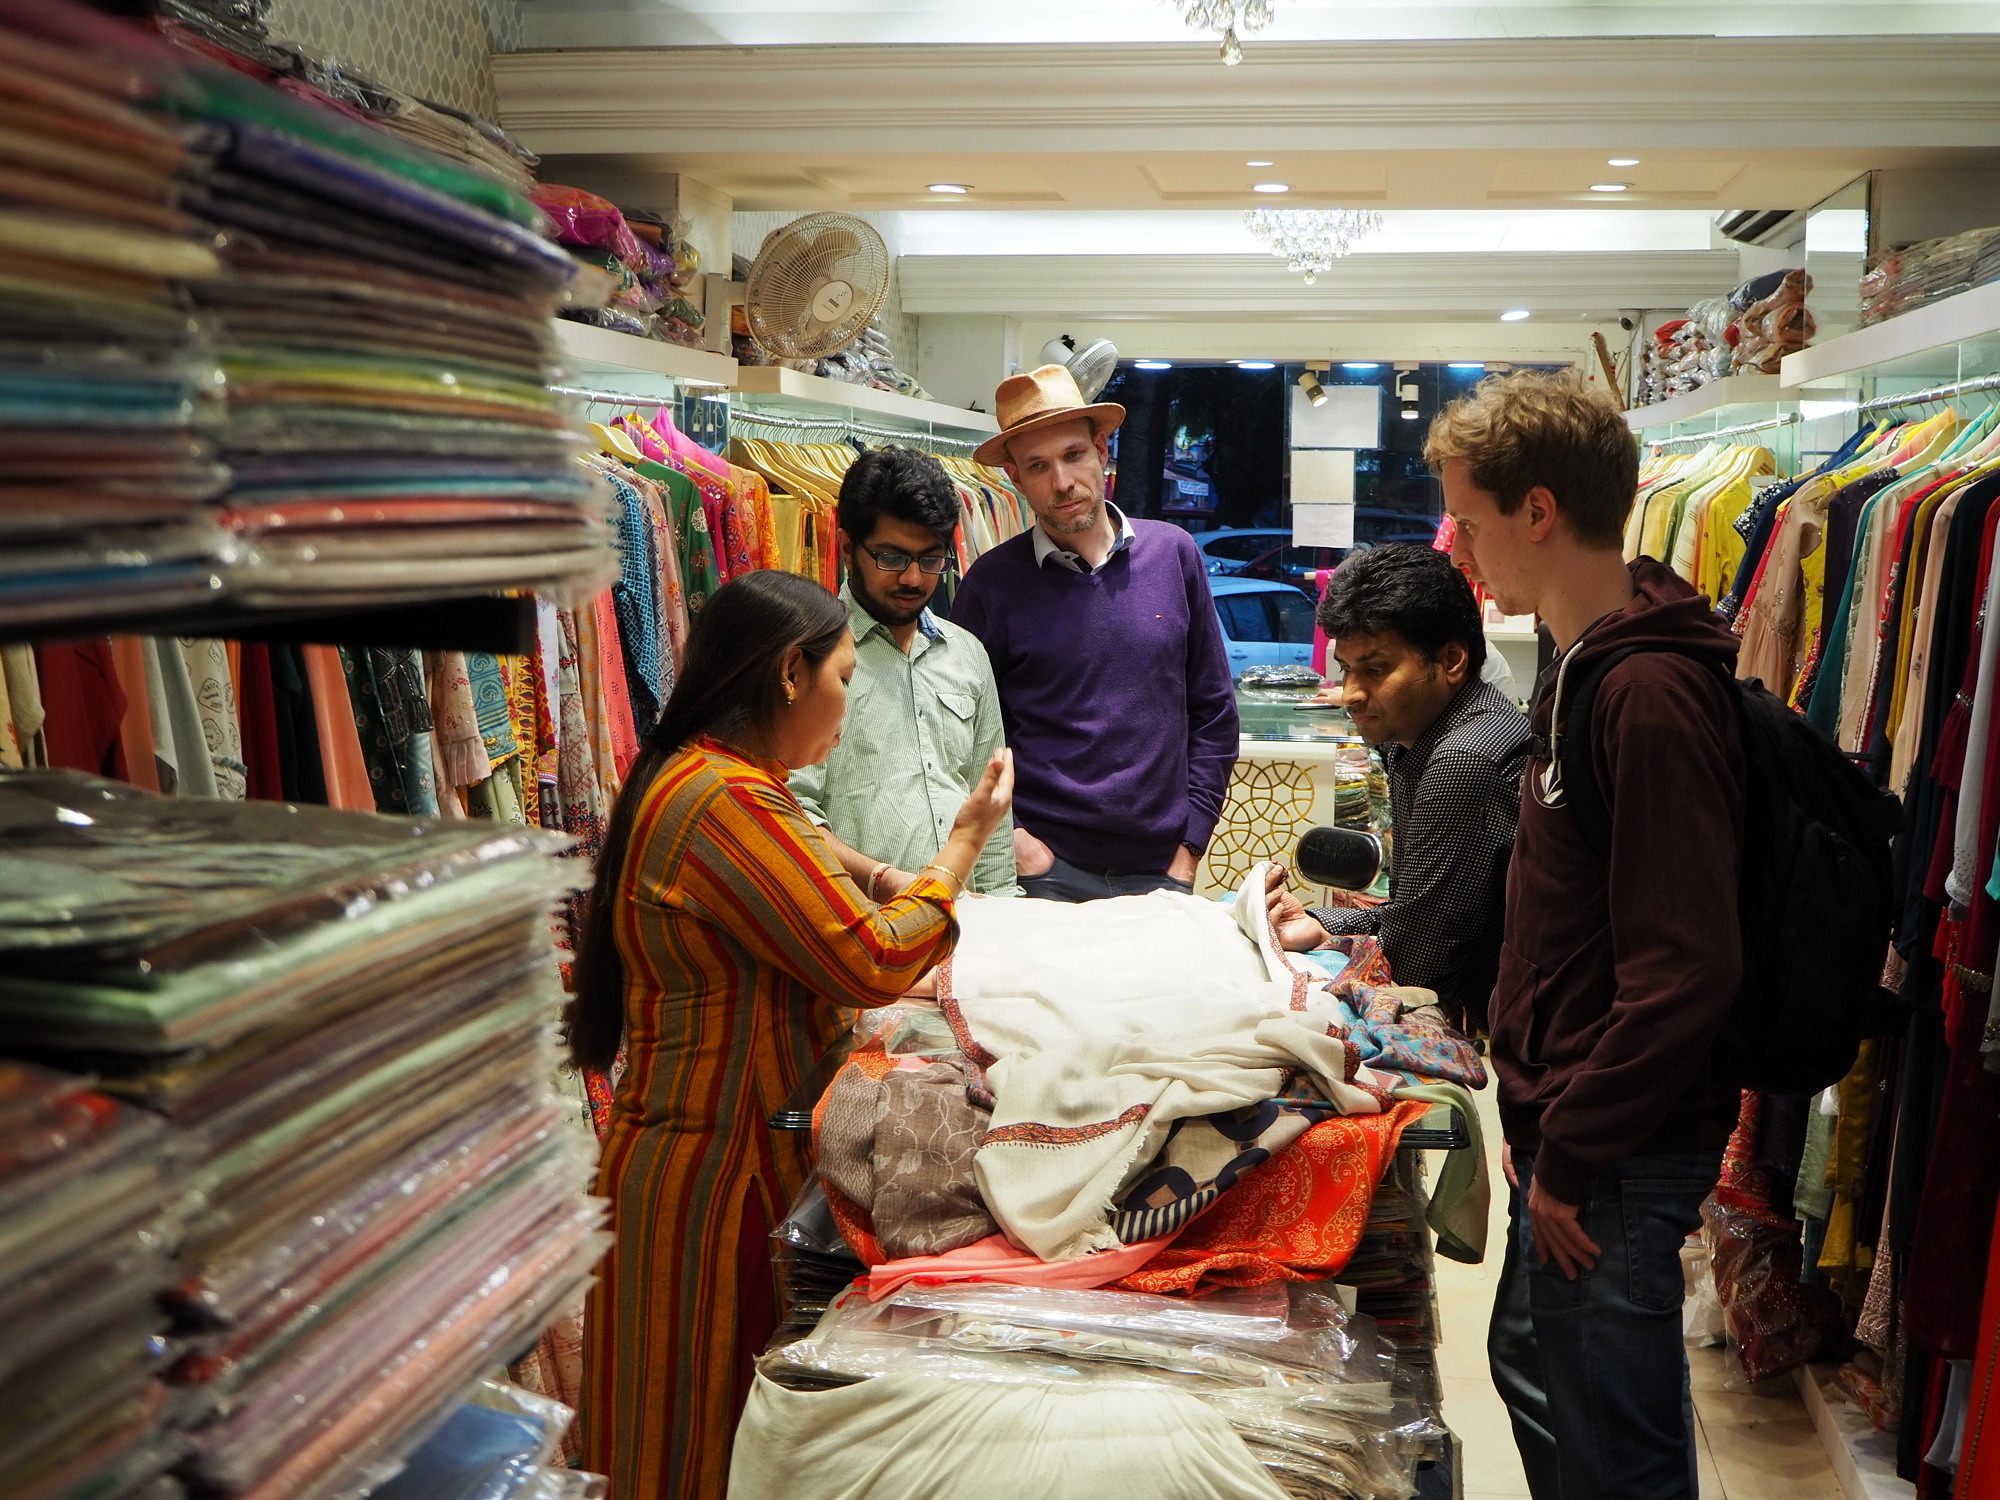 Four researchers from the technical faculties at Friedrich-Alexander-Universität Erlangen-Nürnberg and the Indian Institute of Technology Delhi shopping for clothes and fabrics in Delhi.